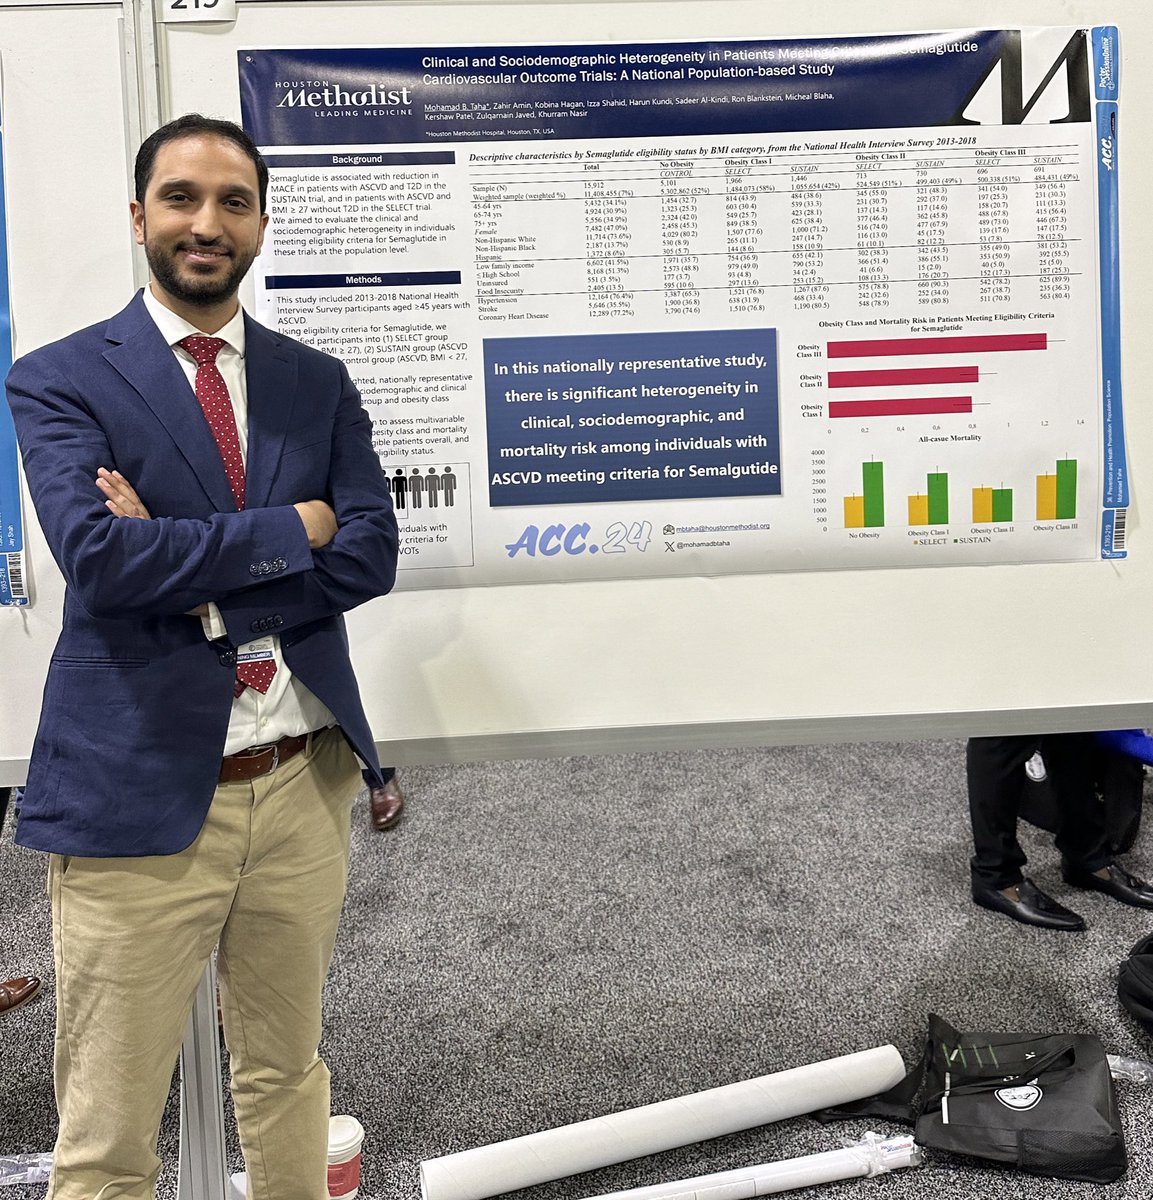 @mohamadbtaha presents the heterogeneity in clinical, sociodemographic and mortality risk among ASCVD individuals eligible for Semaglutide in the US at #ACC24 @khurramn1 @Sadeer_AlKindi